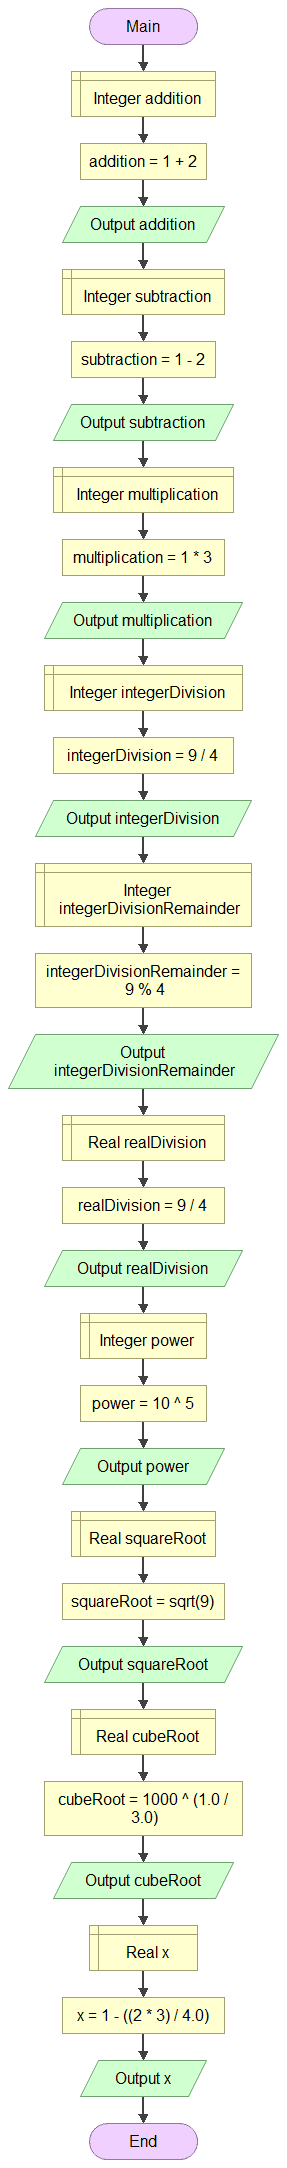 Example of basic arithmetic operations in Flowgorithm: addition, subtraction, multiplication, integer division, integer division remainder, real division, power, square root, cube root and calculus of an expression.